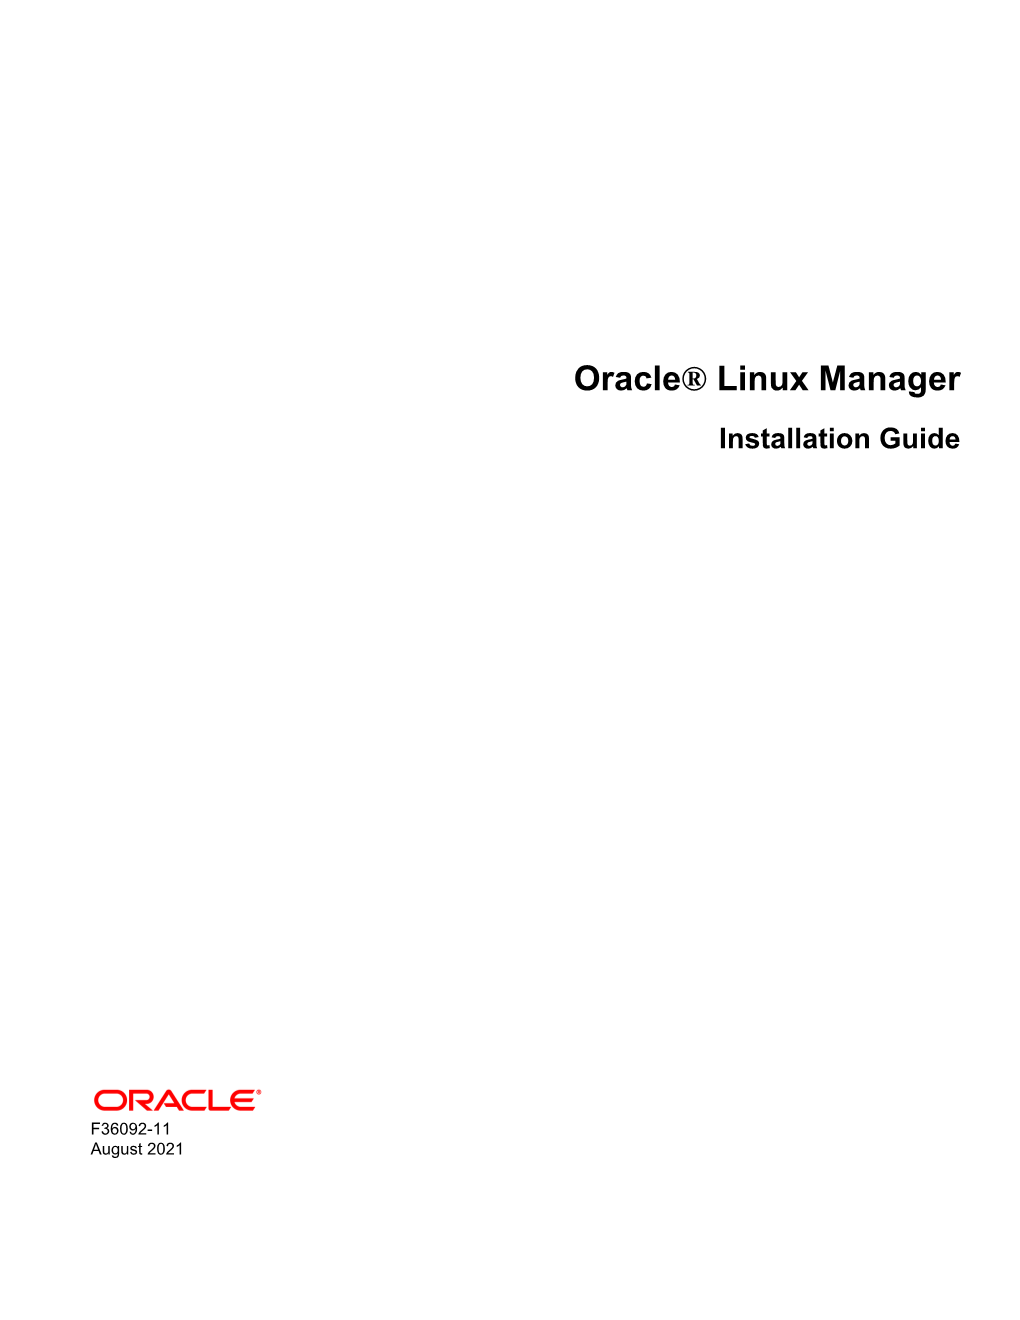 Oracle® Linux Manager Installation Guide